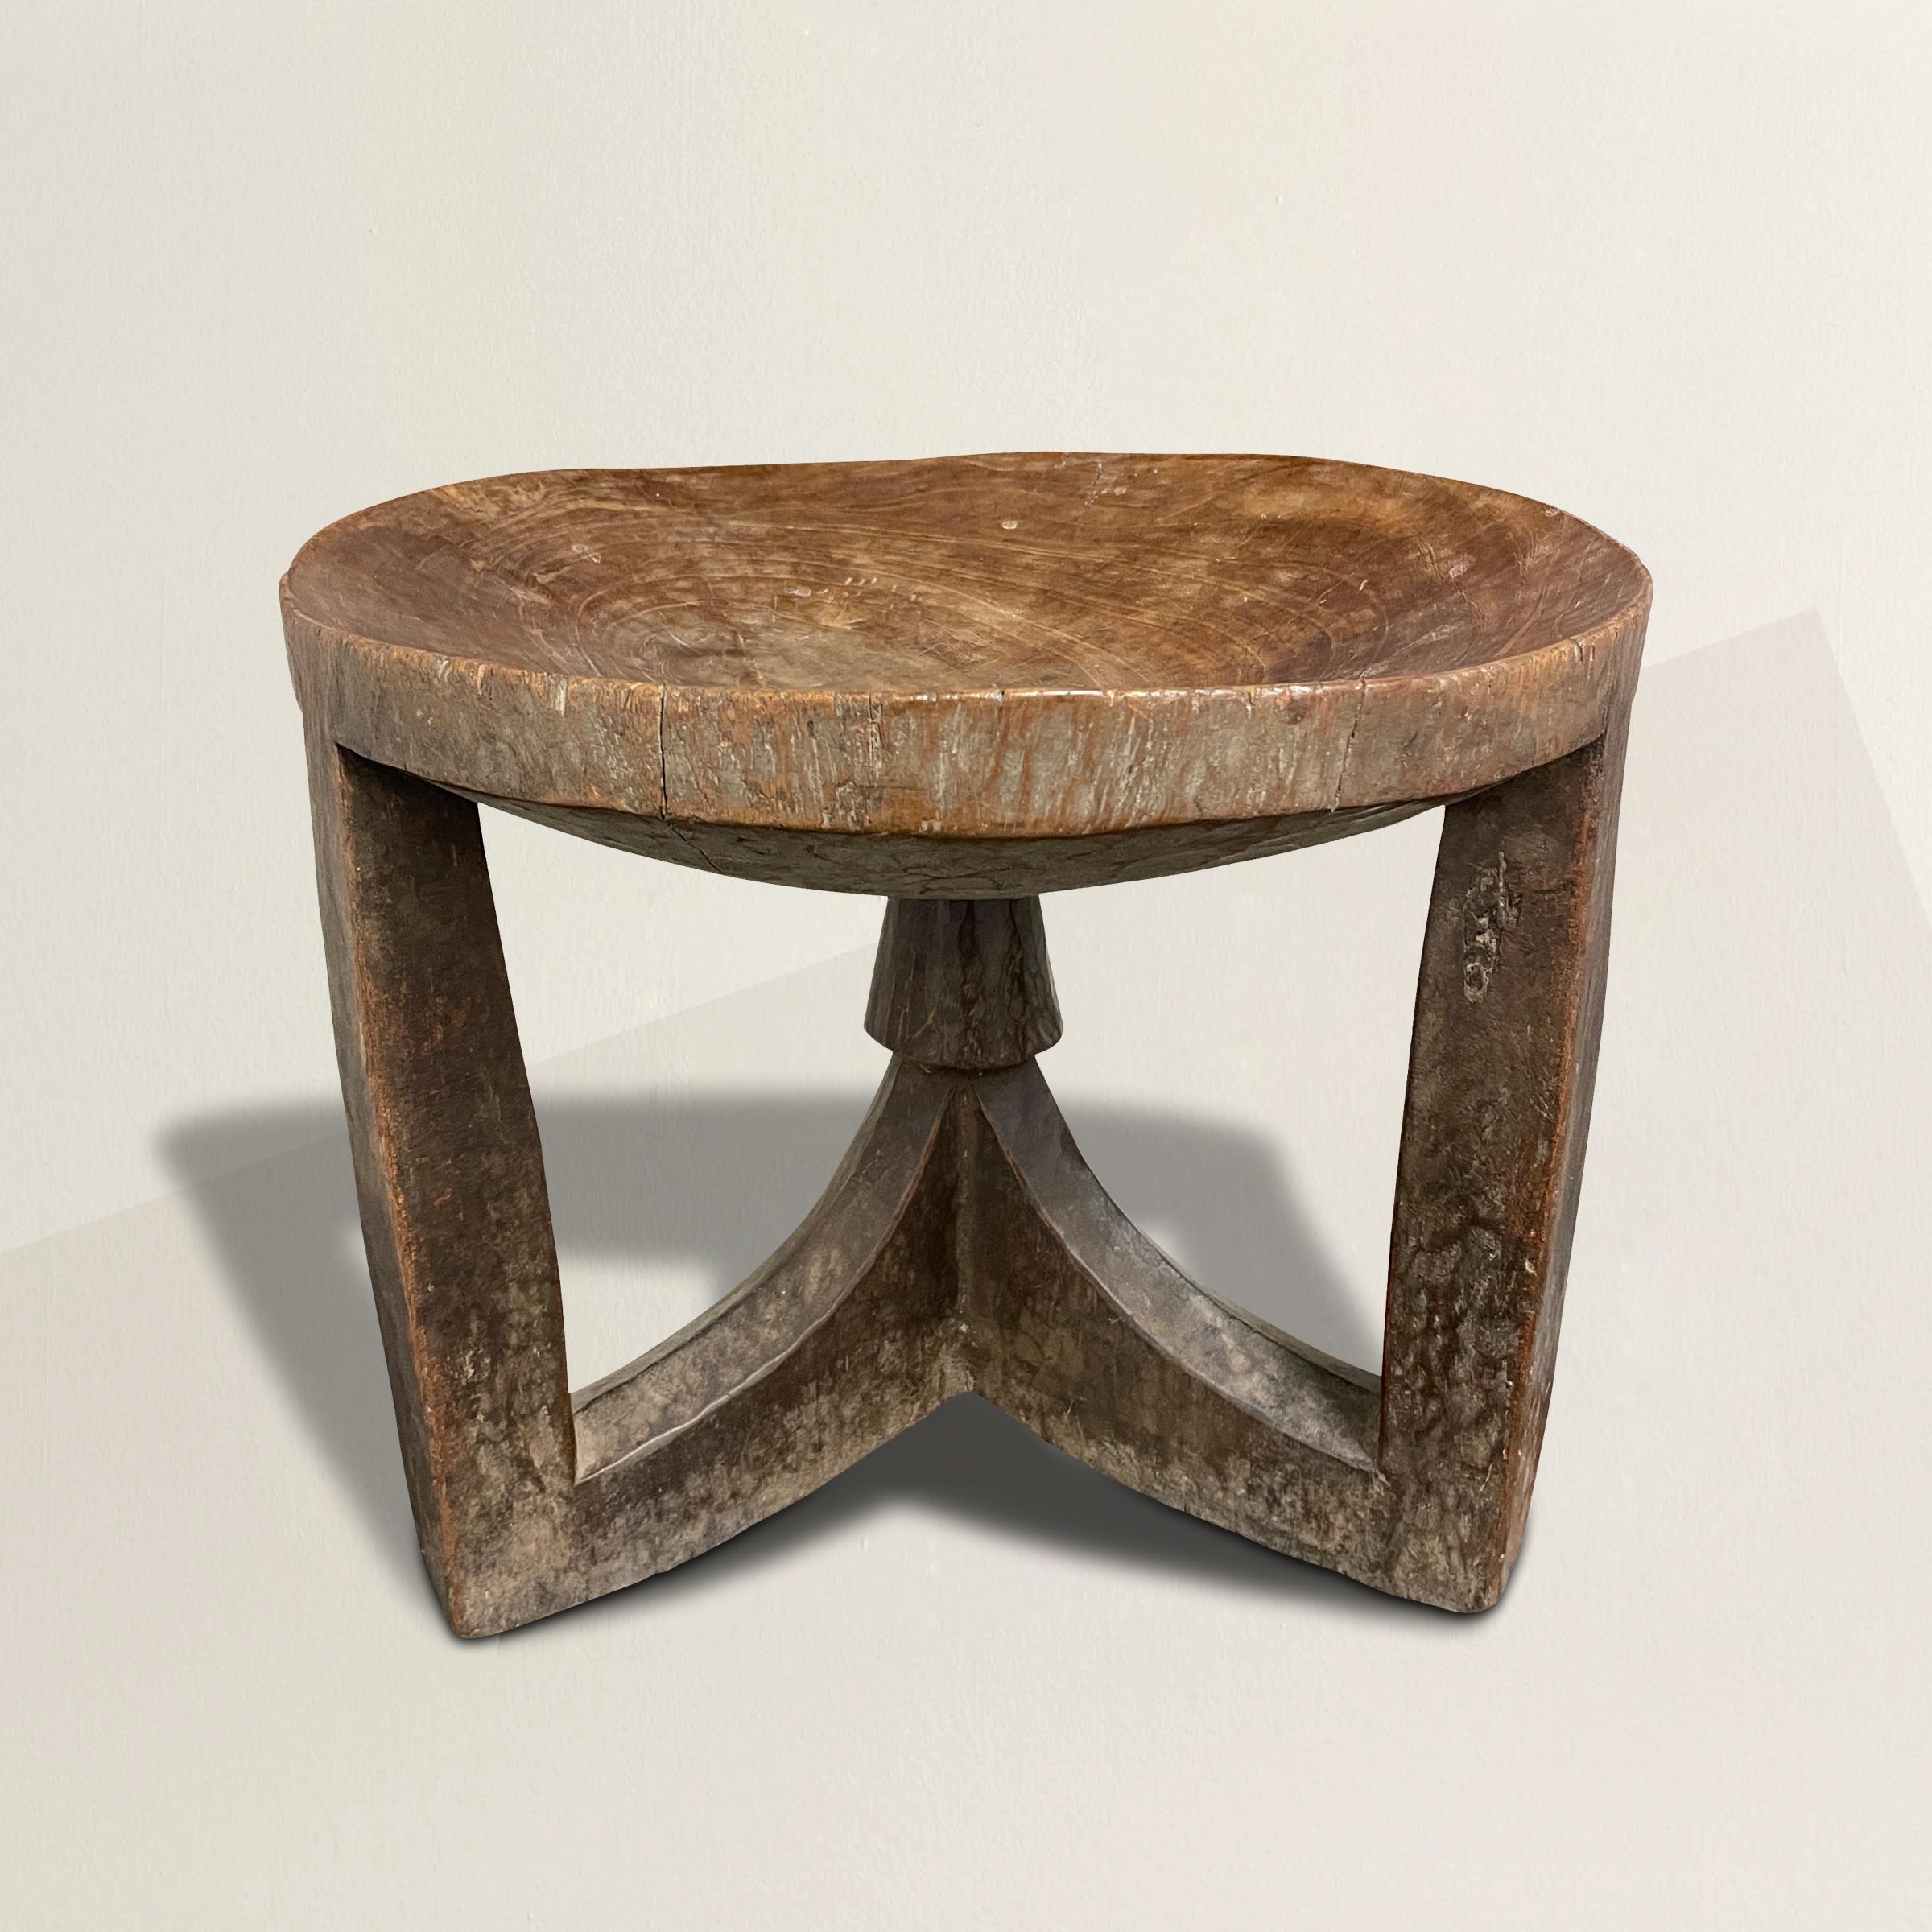 A wonderful 20th century Ethiopian stool carved from one piece of wood, with a concave seat supported by three legs joined in the center. Perfect as a stool, but also doubles as a table next to your favorite armchair.